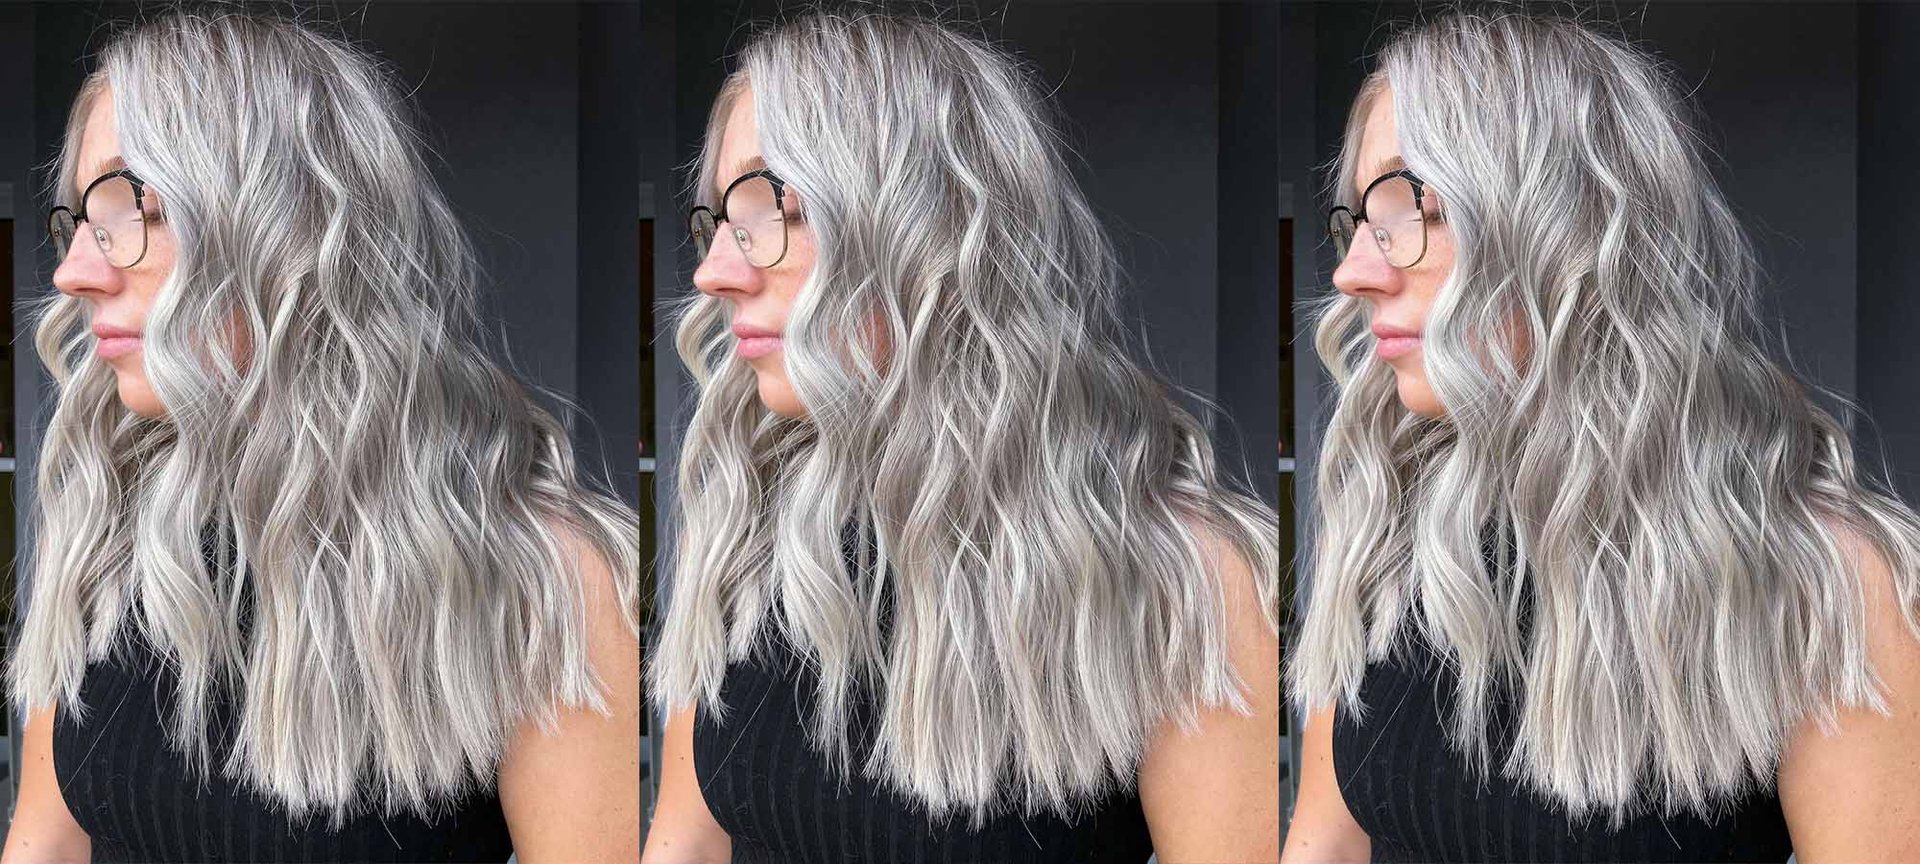 2. Blonde Hair with Silver Highlights - wide 7